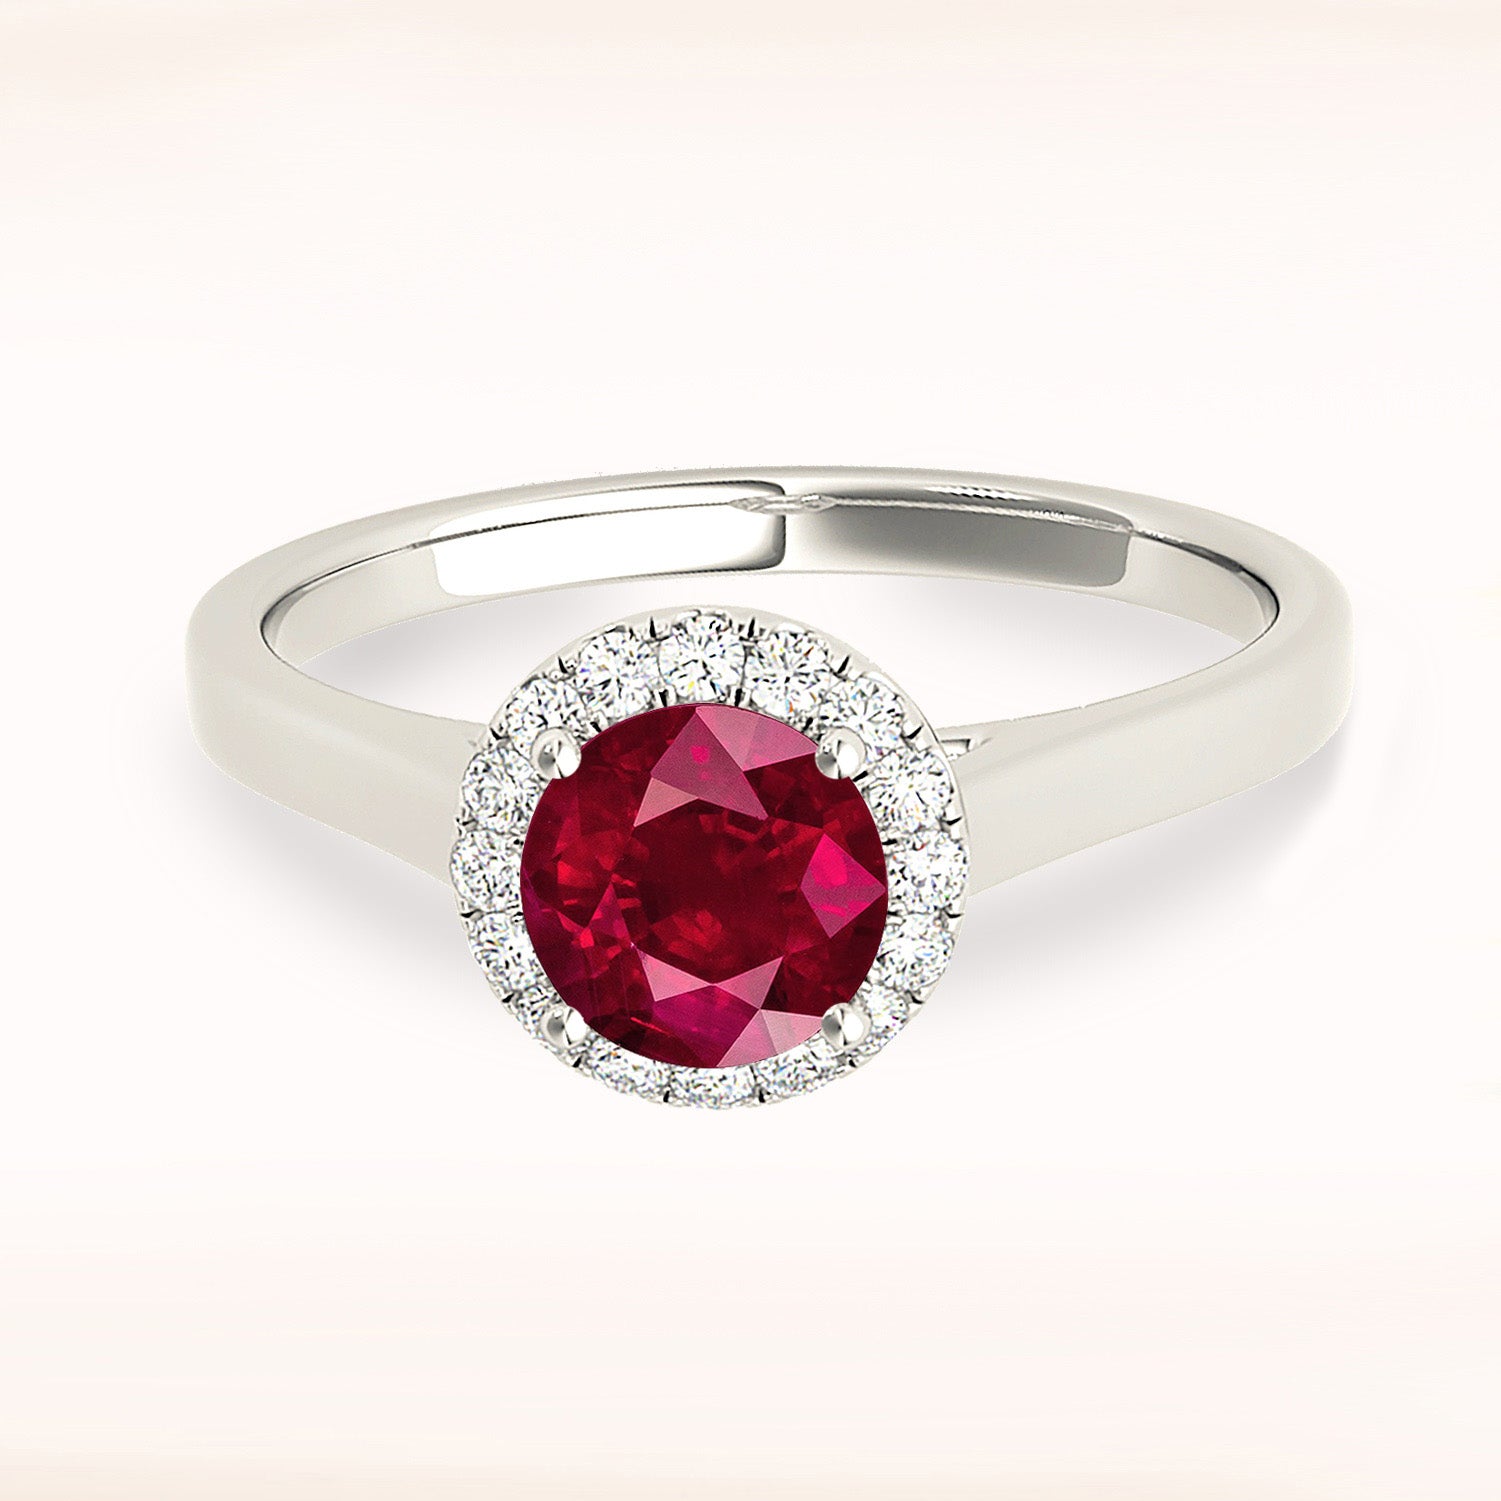 1.35 ct. Genuine Ruby Ring With 0.10 ctw. Diamond Thin, Wide Solid Gold Band, Elegant Halo Setting| Round Ruby Halo Ring | Natural Ruby Ring-in 14K/18K White, Yellow, Rose Gold and Platinum - Christmas Jewelry Gift -VIRABYANI